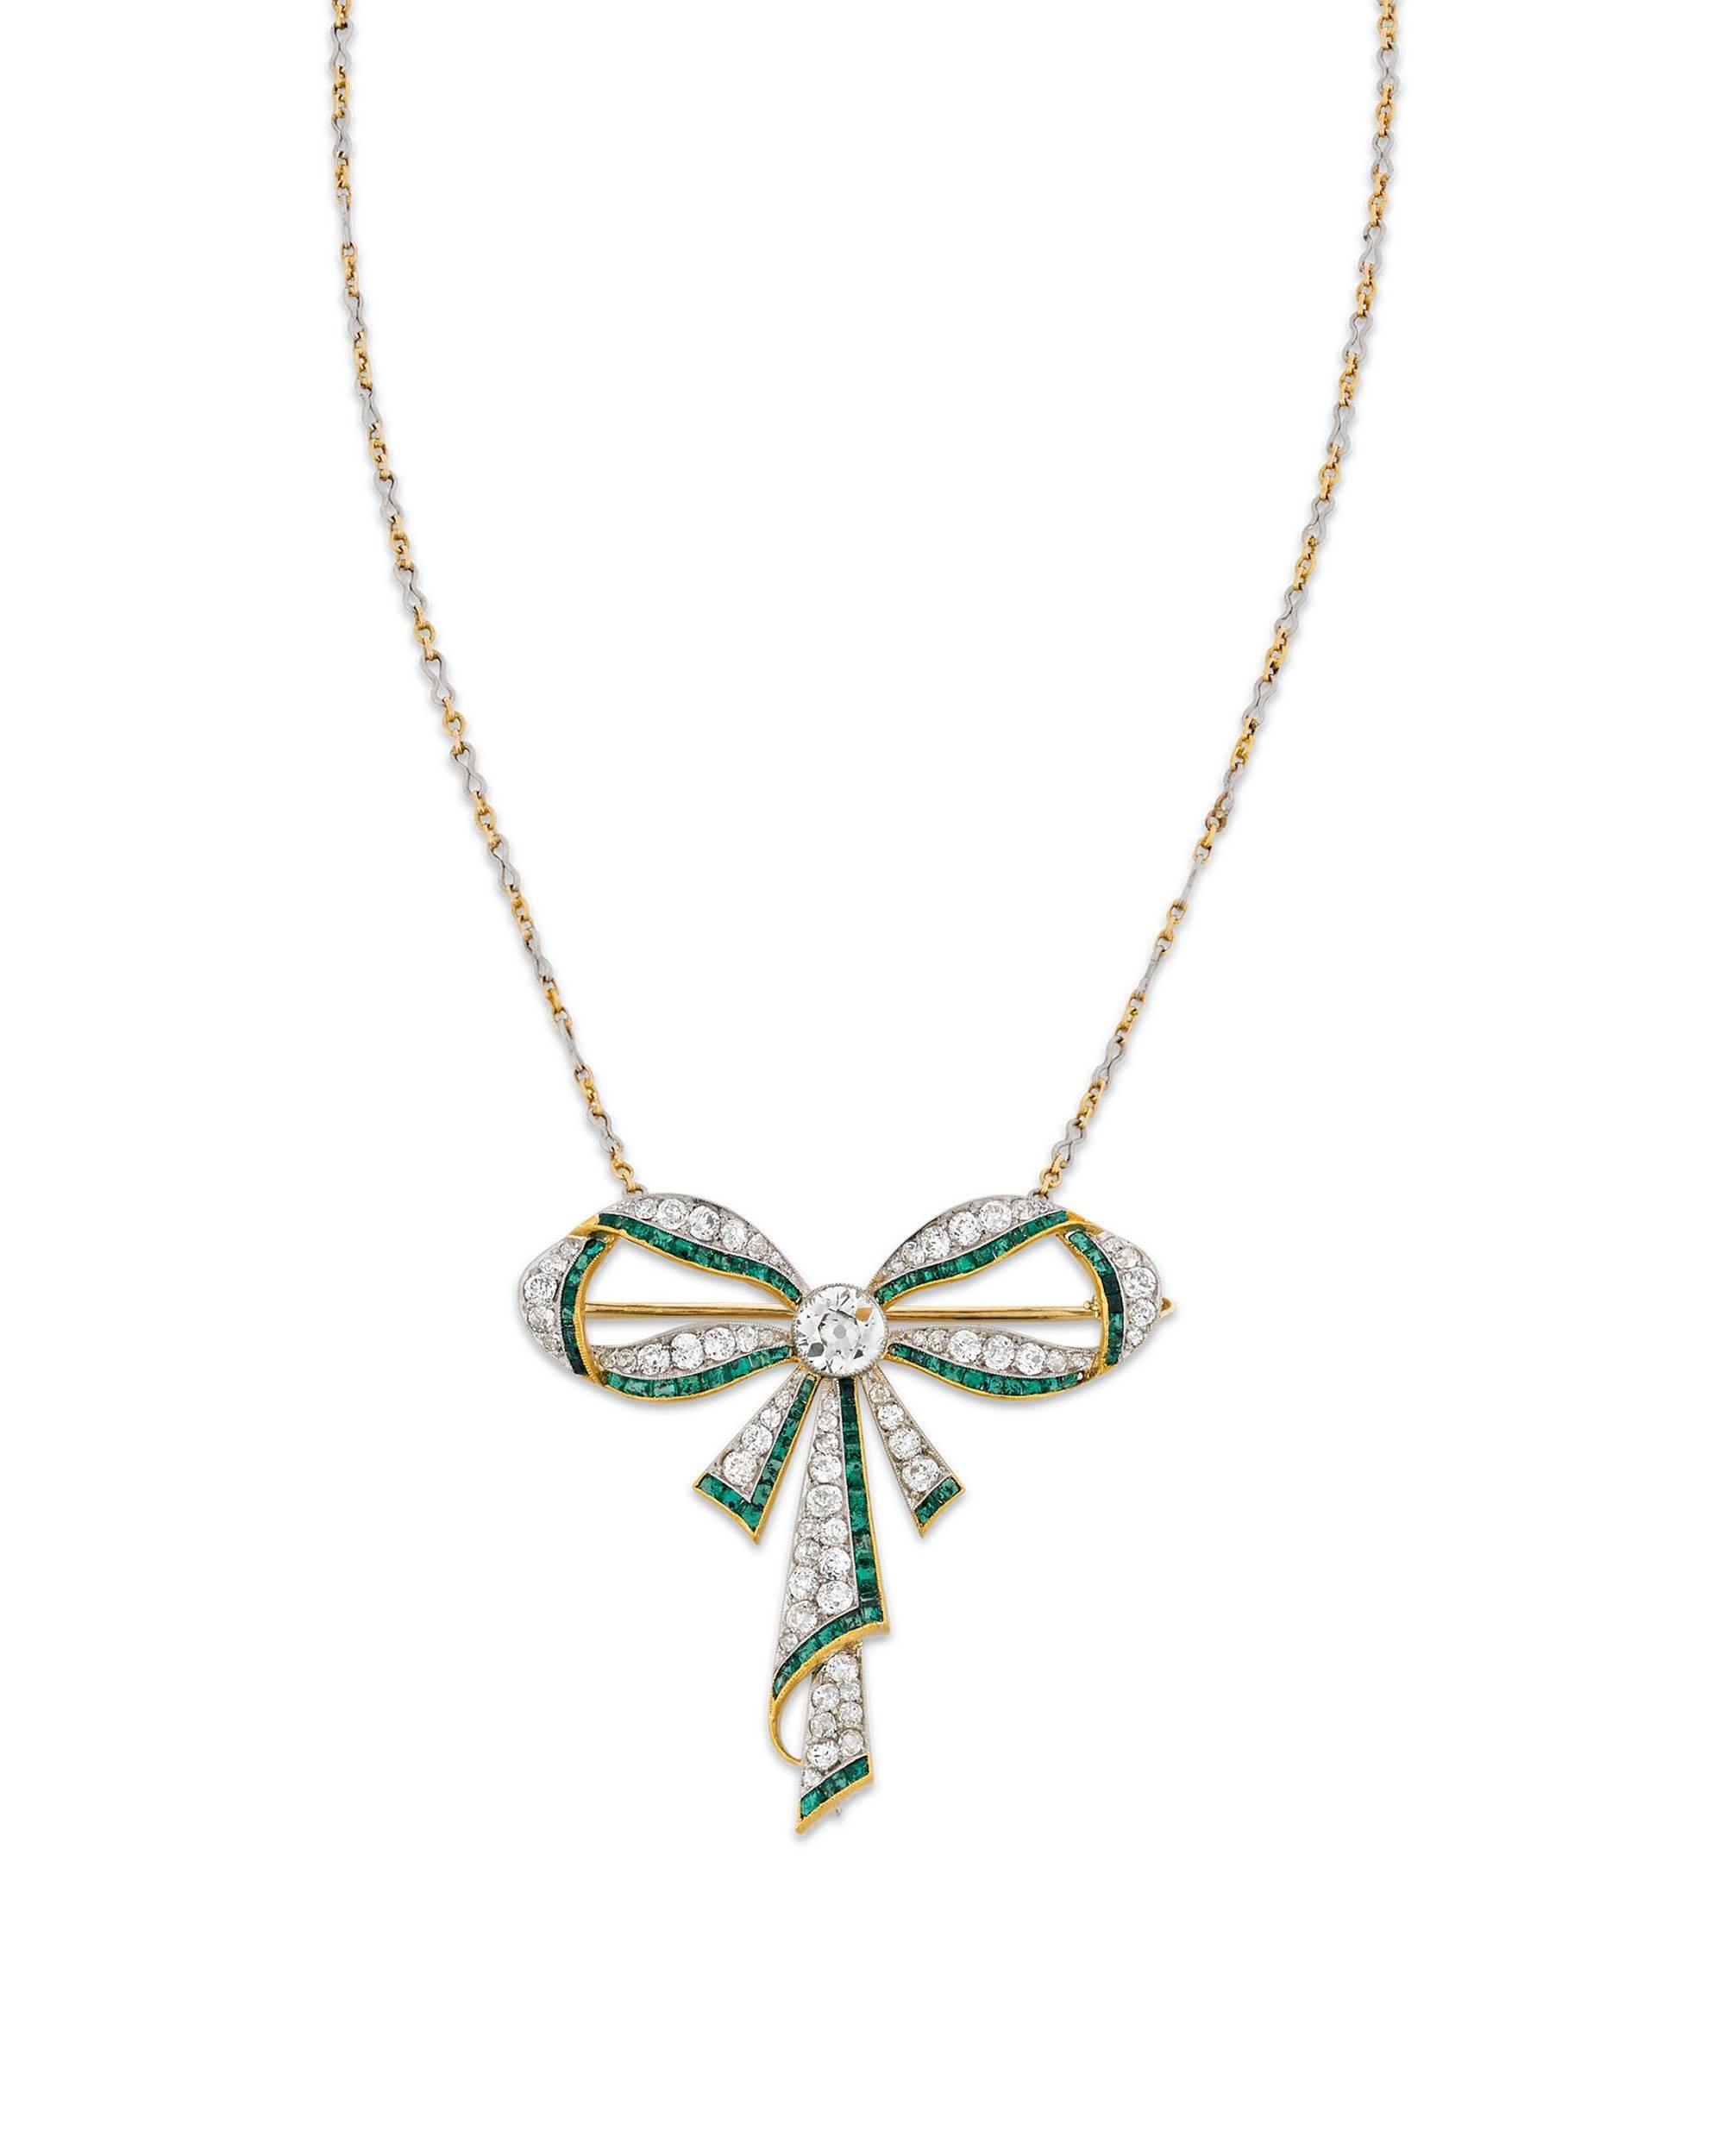 This sensational Edwardian pendant necklace showcases an exquisite design illuminated by extraordinary stones. Dazzling colorless diamonds adorn the charming 18k yellow gold and platinum bow form, while verdant emeralds add dramatic detail to the